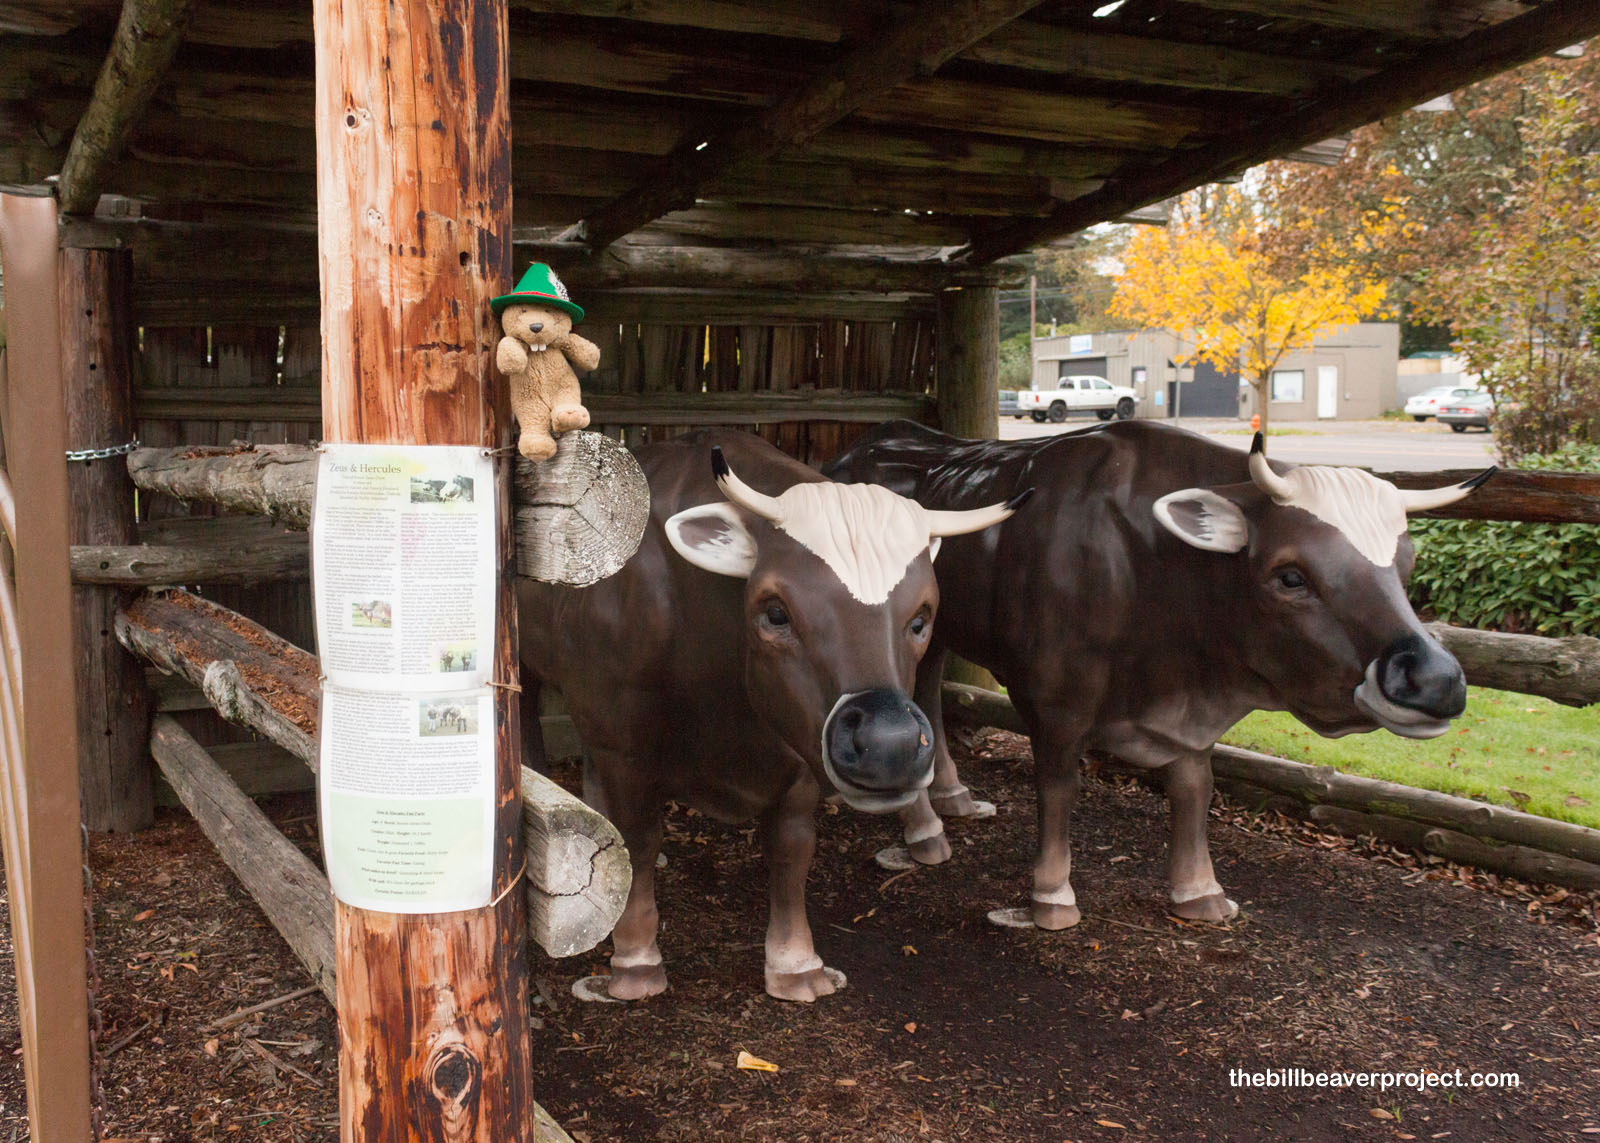 Because of COVID-19, the museum was closed, but I got to see some oxen!